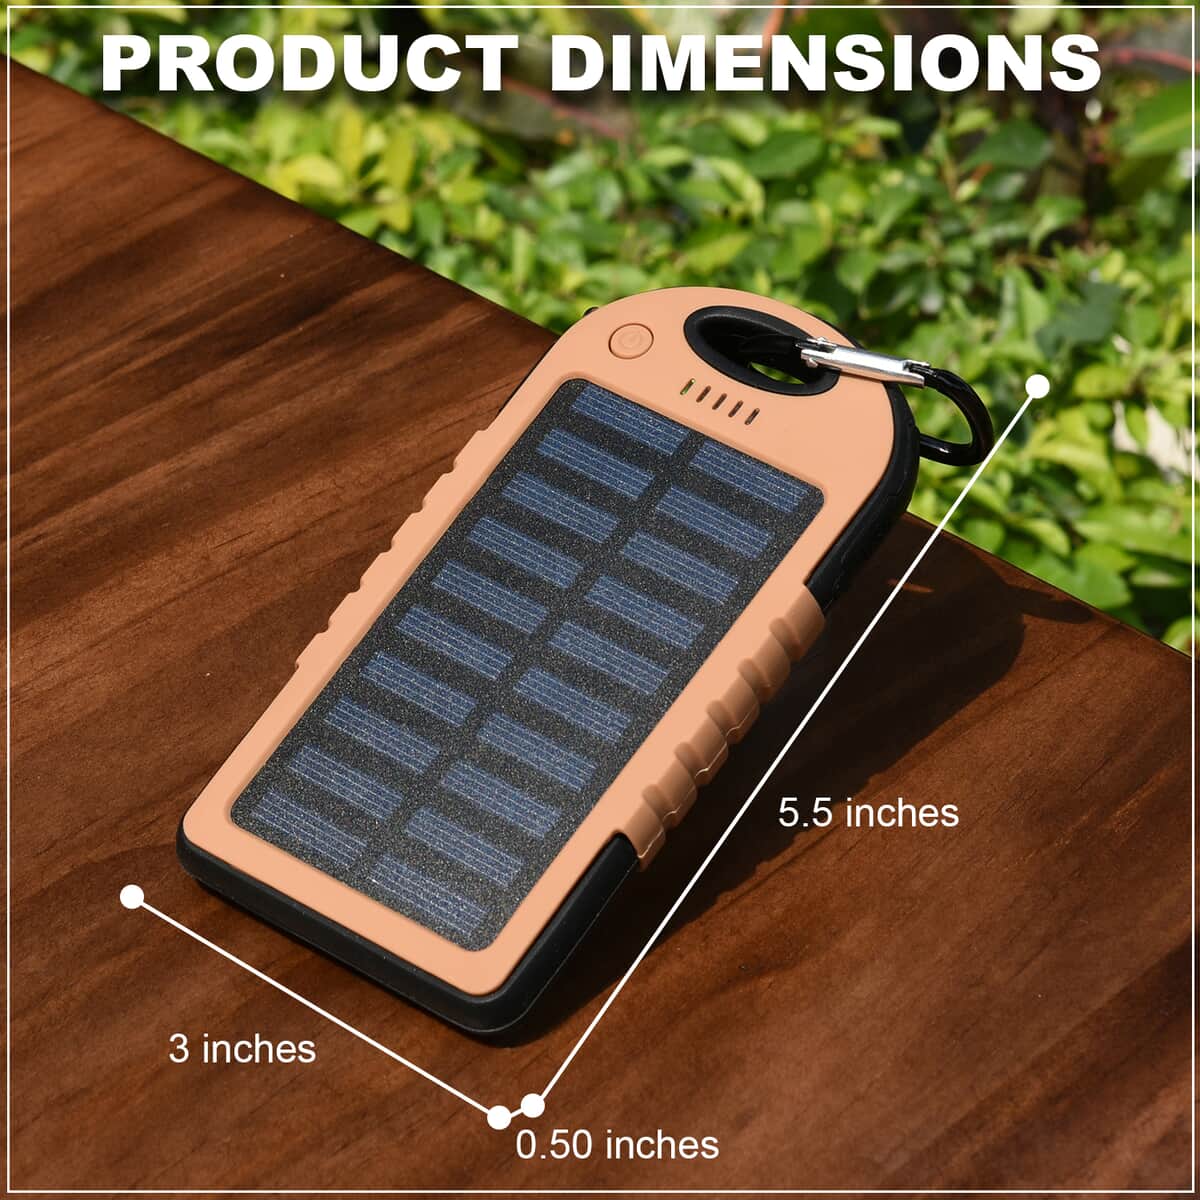 Homesmart Camel Color Carabiner Solar 5000 mAh Battery Charger with USB & Emergency LED Torch image number 3